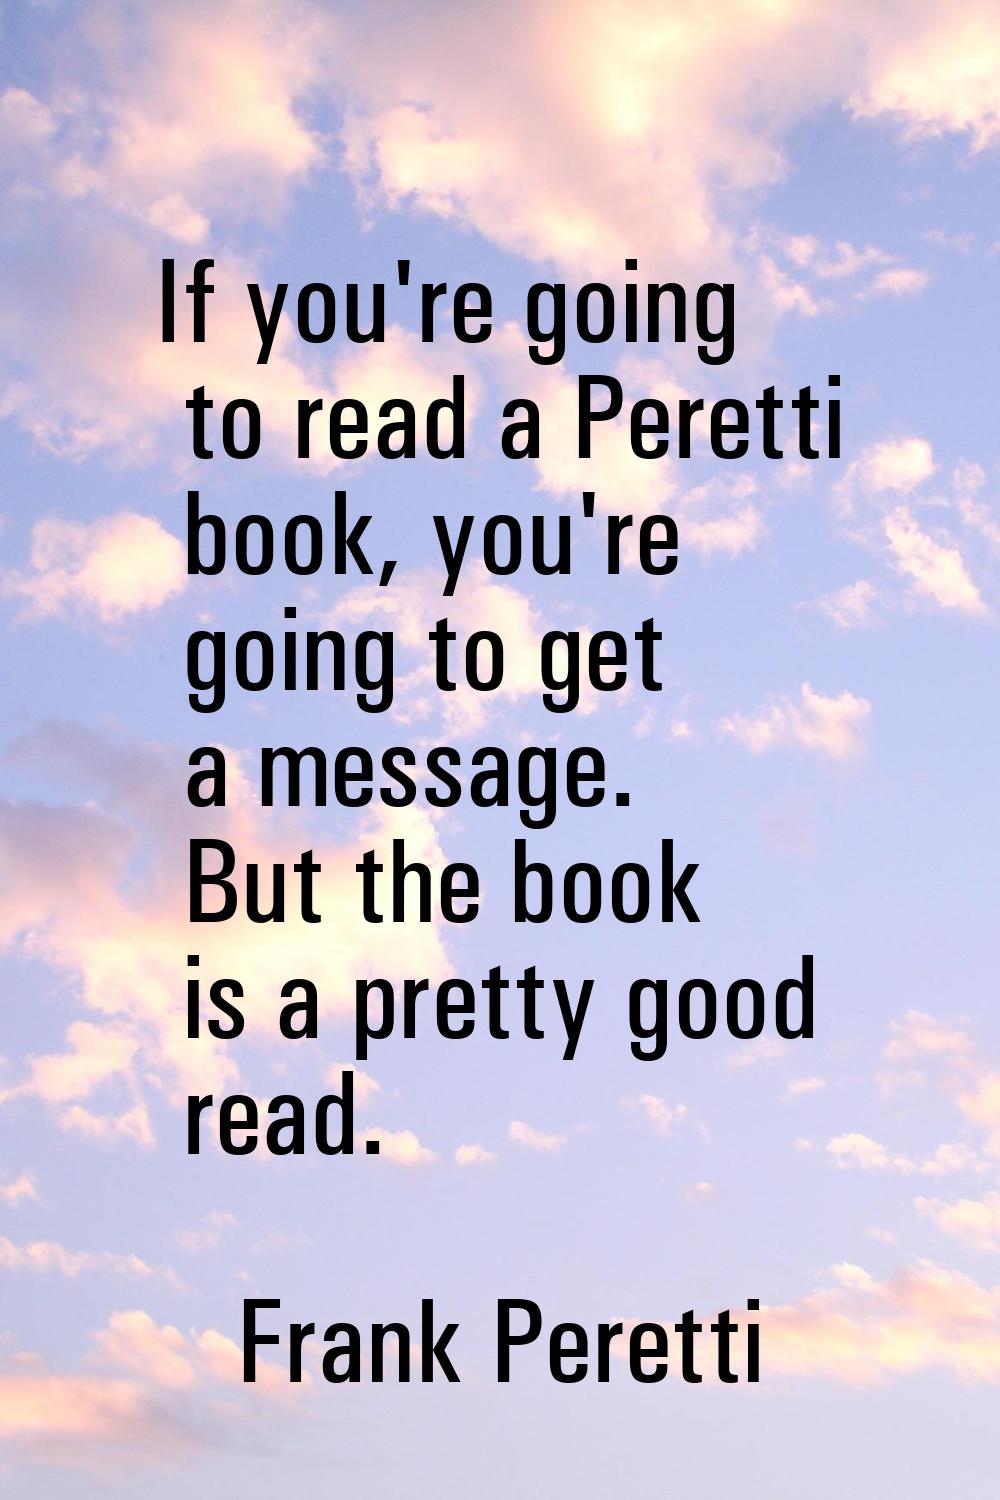 If you're going to read a Peretti book, you're going to get a message. But the book is a pretty goo